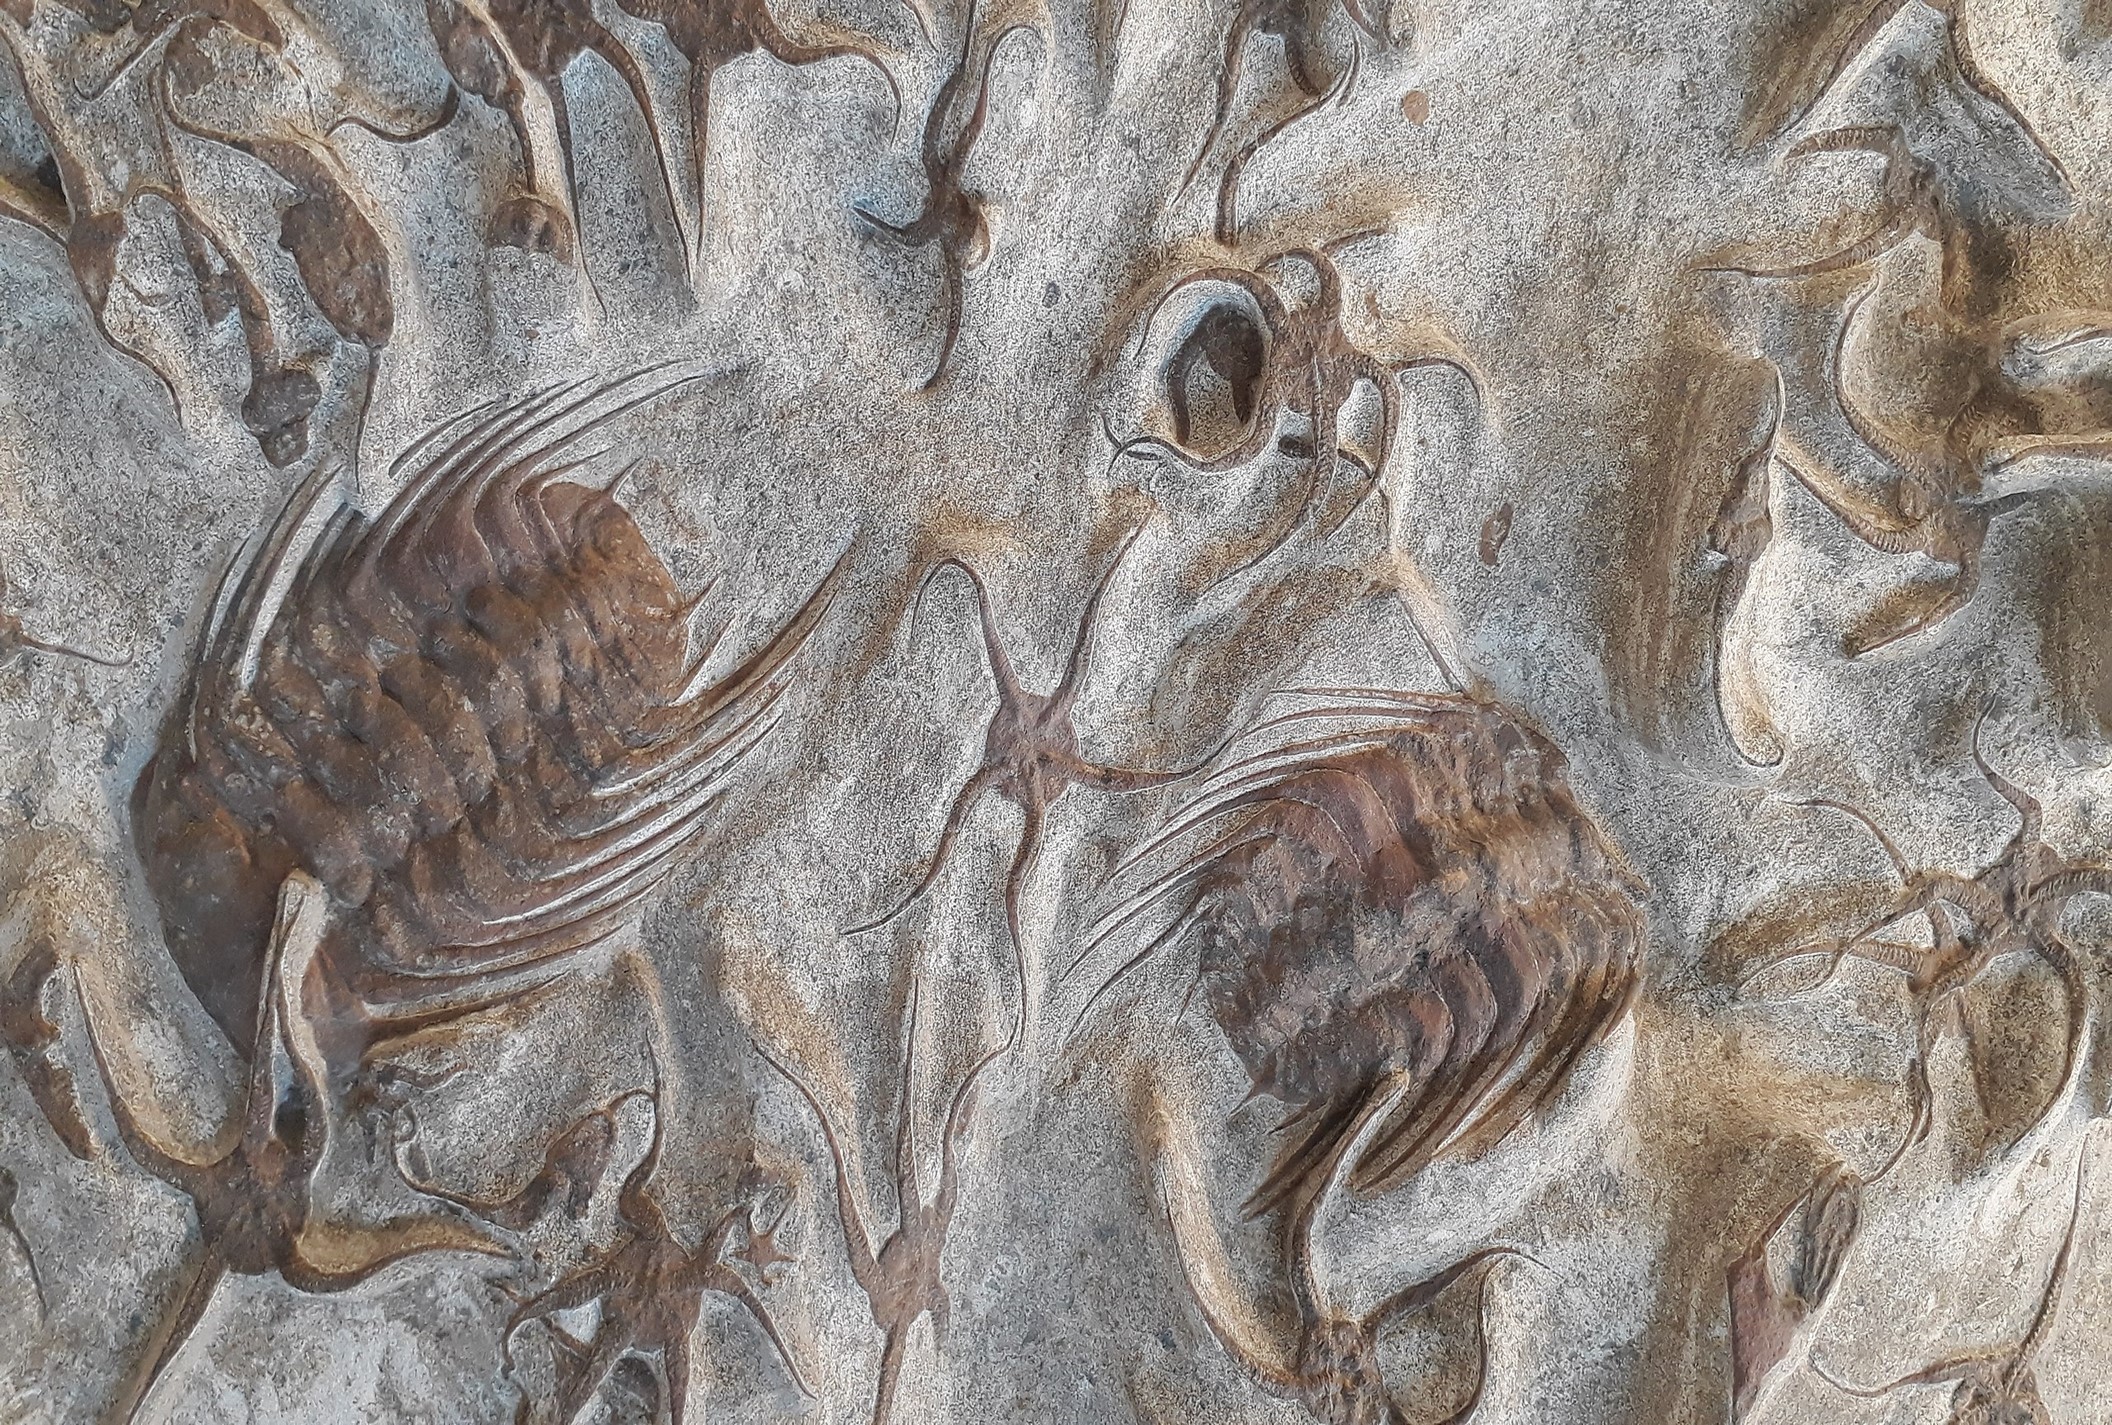 How Fossils Form | EarthDate